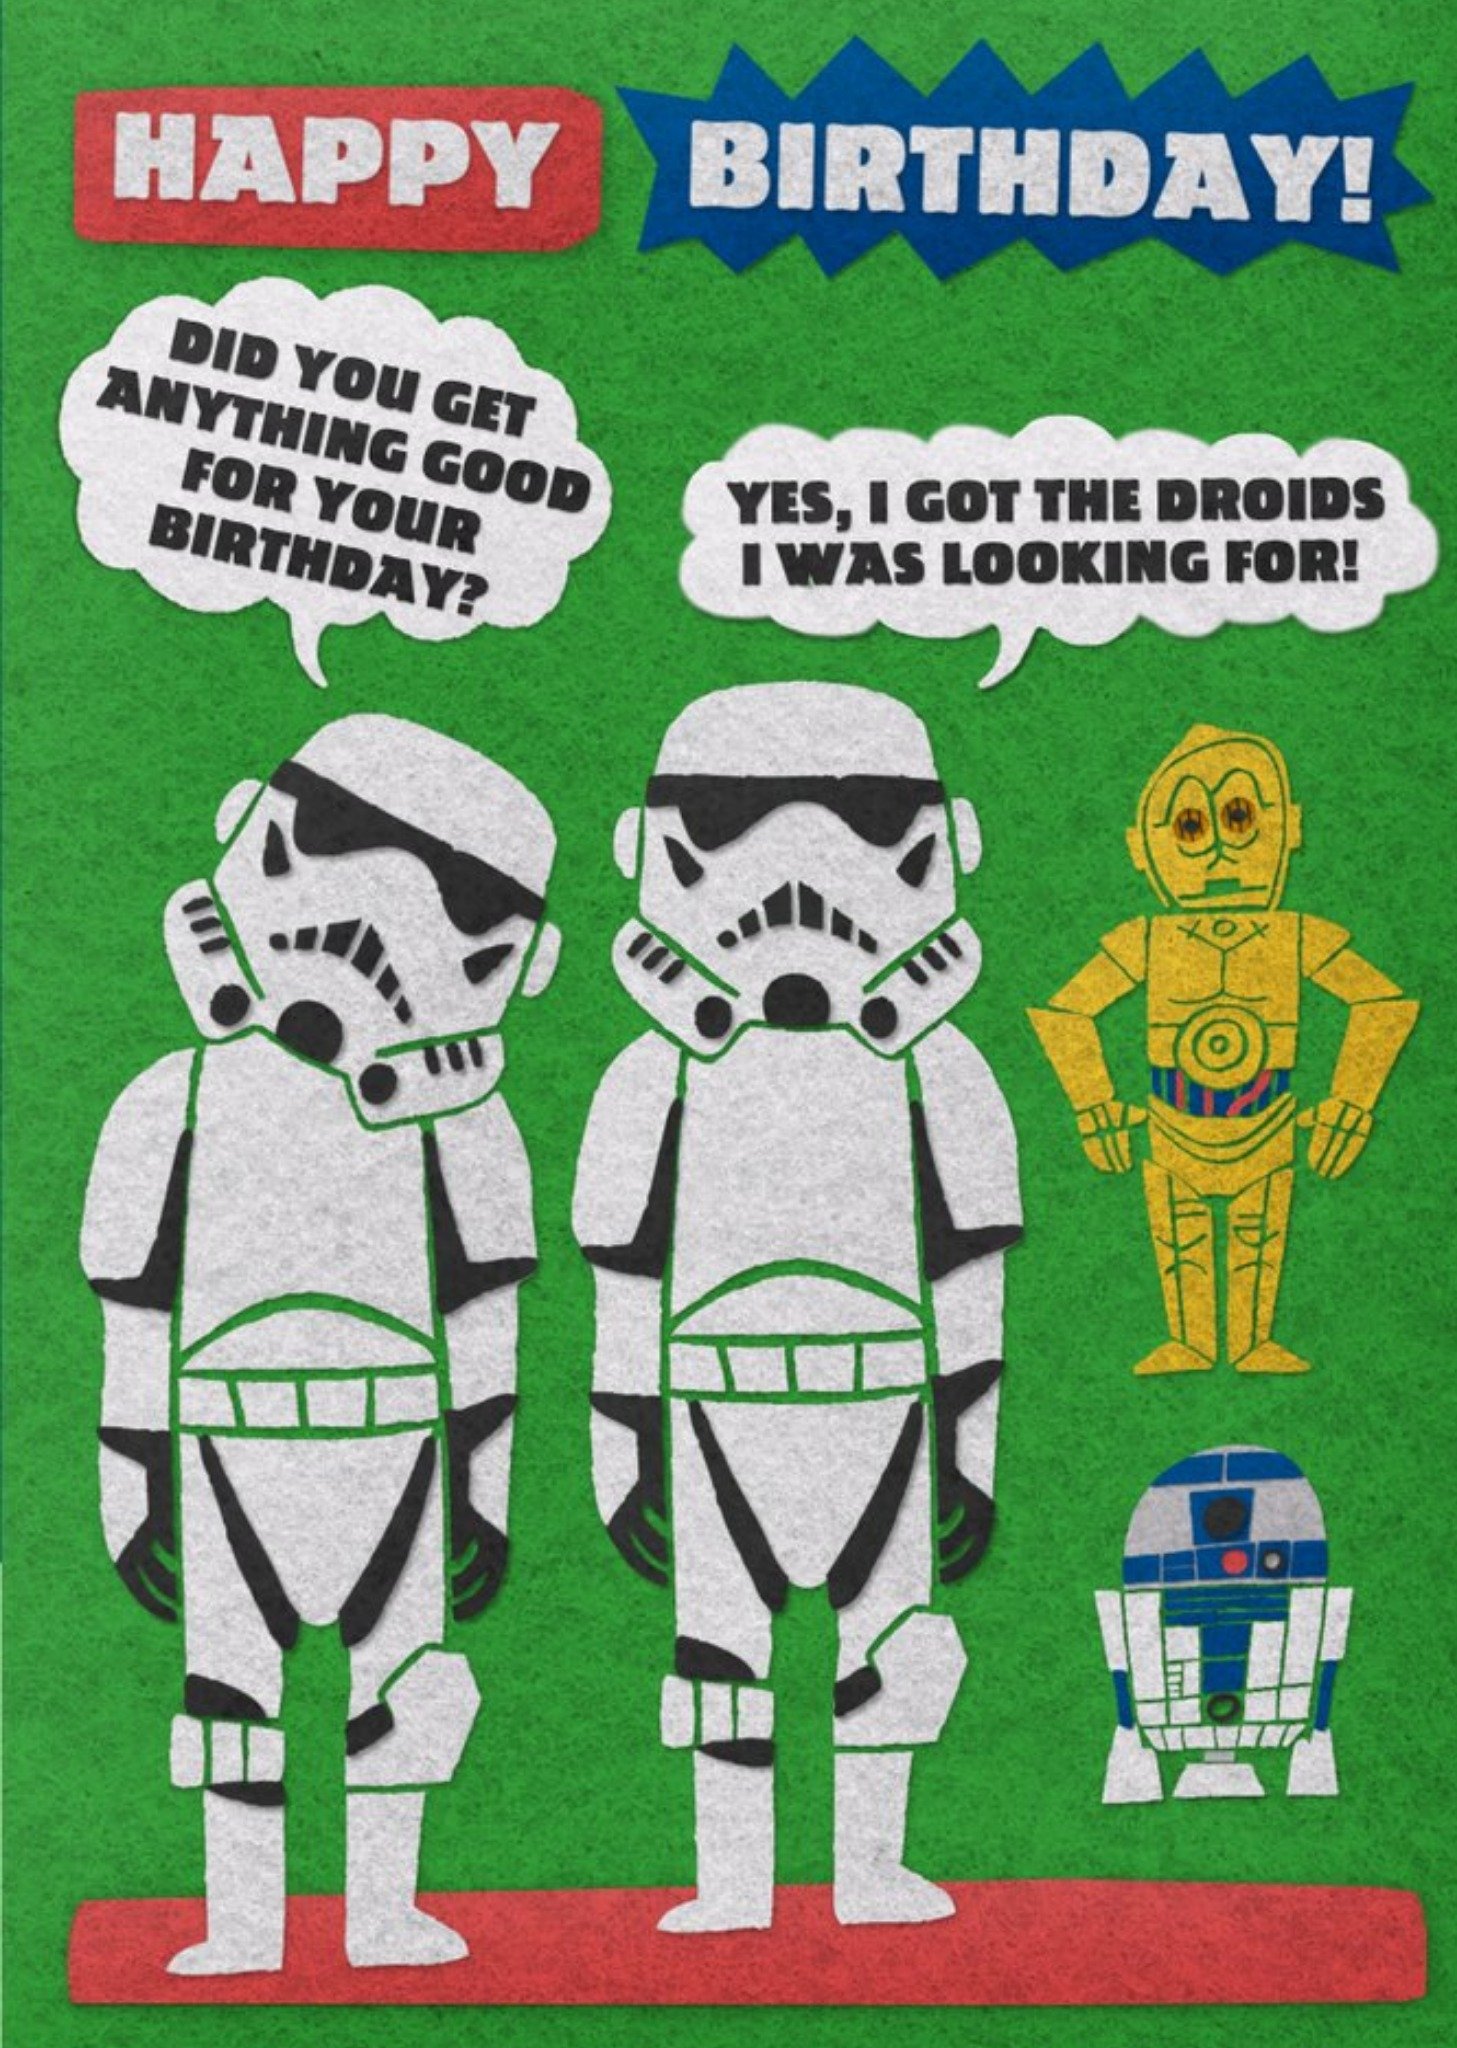 Disney Birthday Card - Star Wars - Stormtroopers - Droids, Large